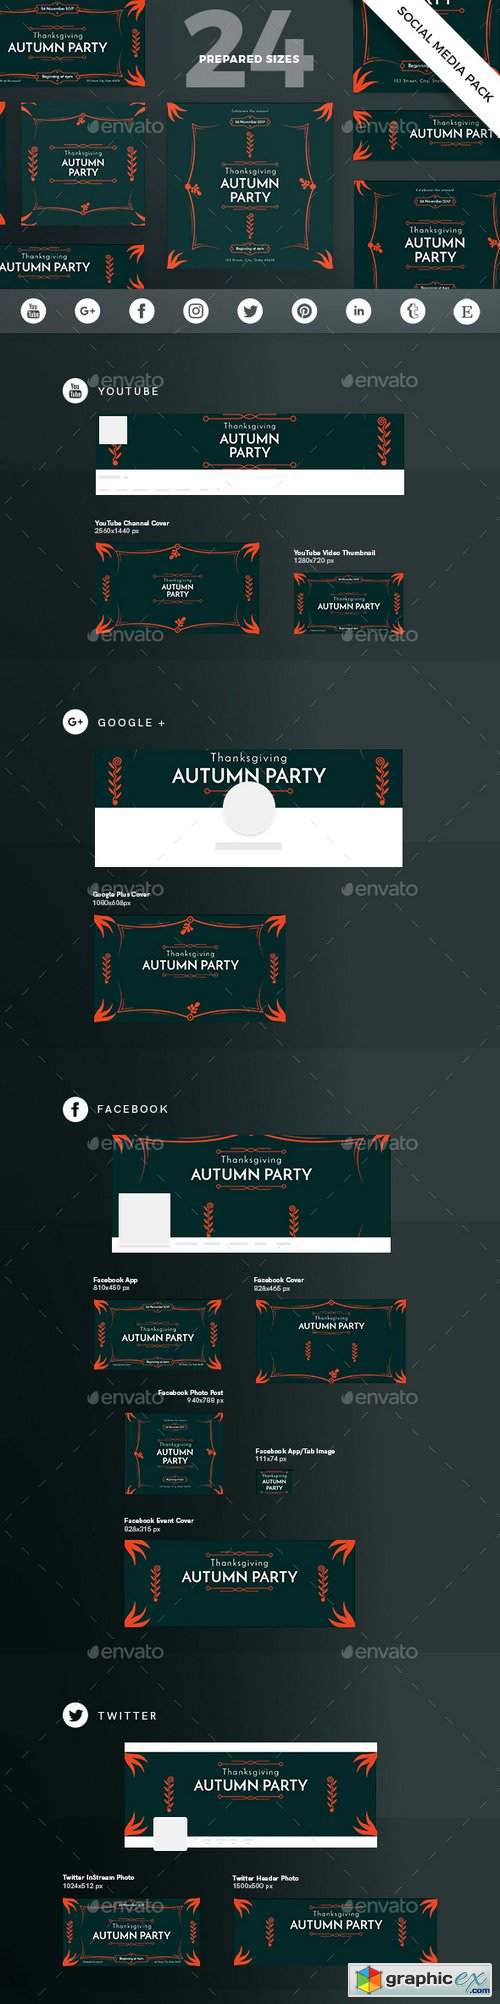 Autumn Party Social Media Pack